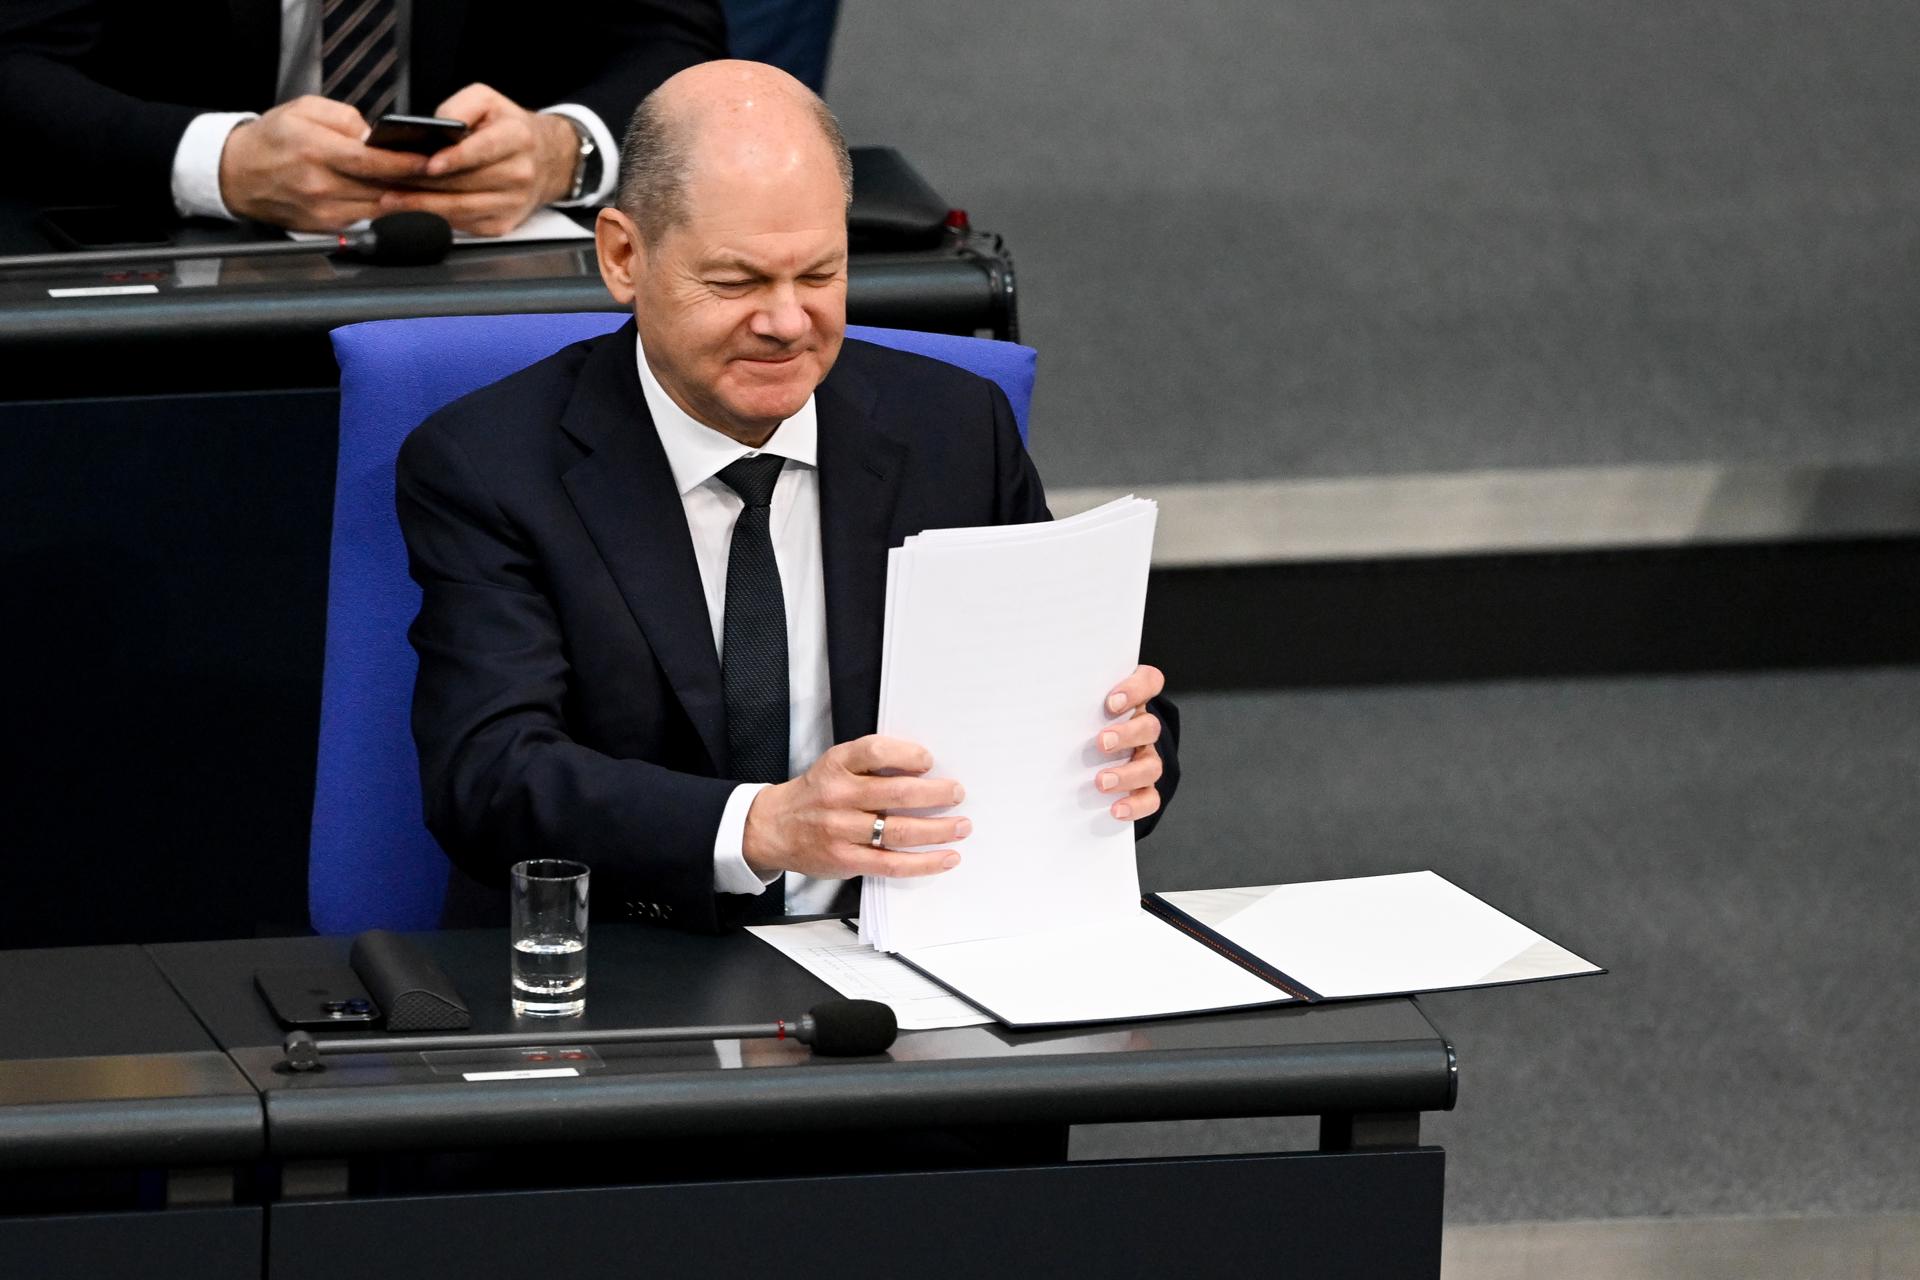 German Chancellor Olaf Scholz after delivering his statement 'A Year of Changing Times - Strengthening Germany's Security and Alliances, Continuing to Support Ukraine' at the German parliament Bundestag in Berlin, Germany, 02 March 2023. EFE/EPA/FILIP SINGER